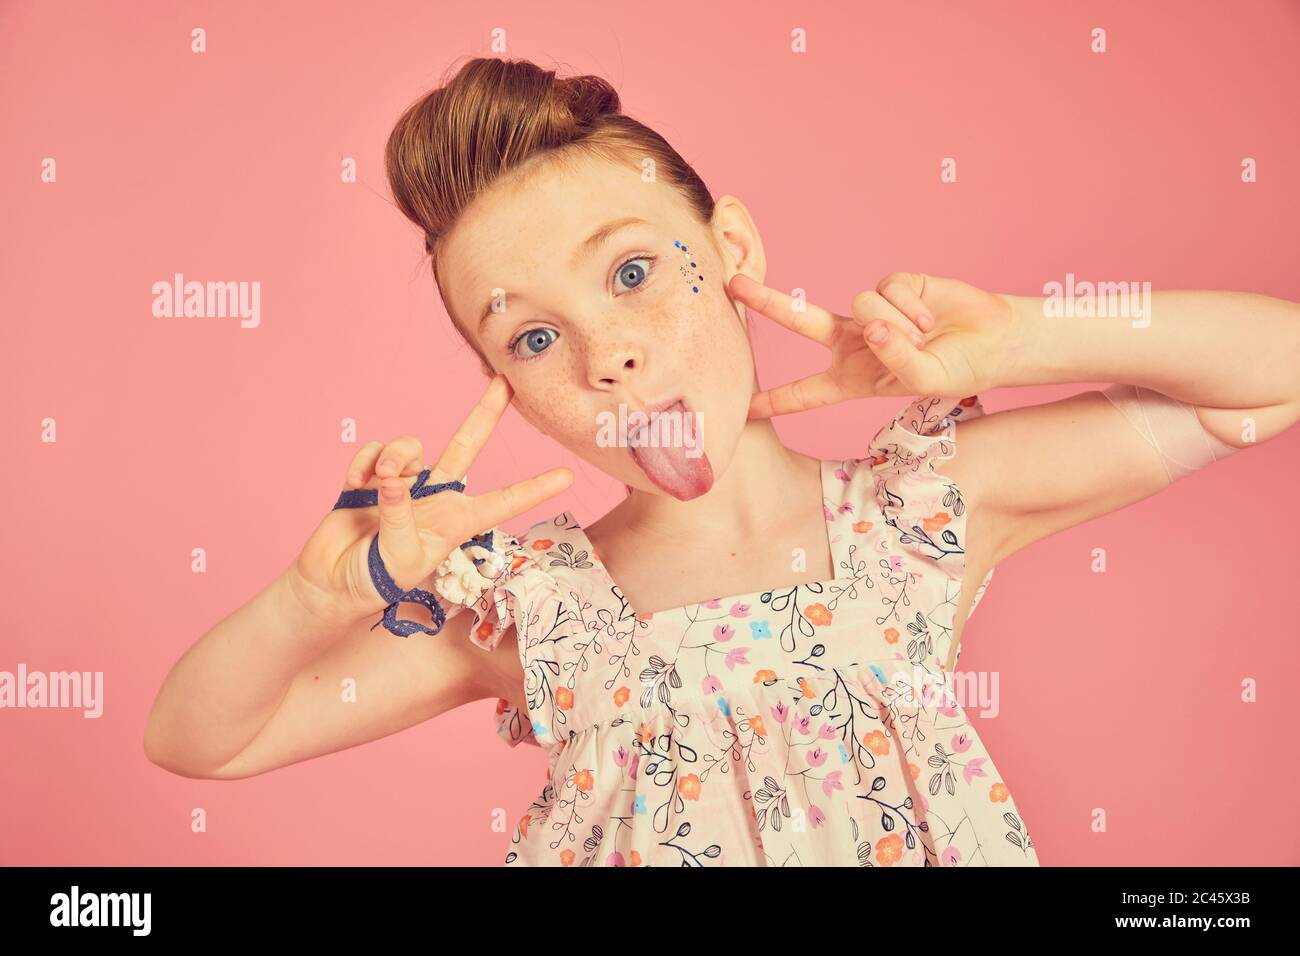 Portrait of brunette girl wearing frilly dress with floral pattern on pink background, sticking out tongue at camera. Stock Photo